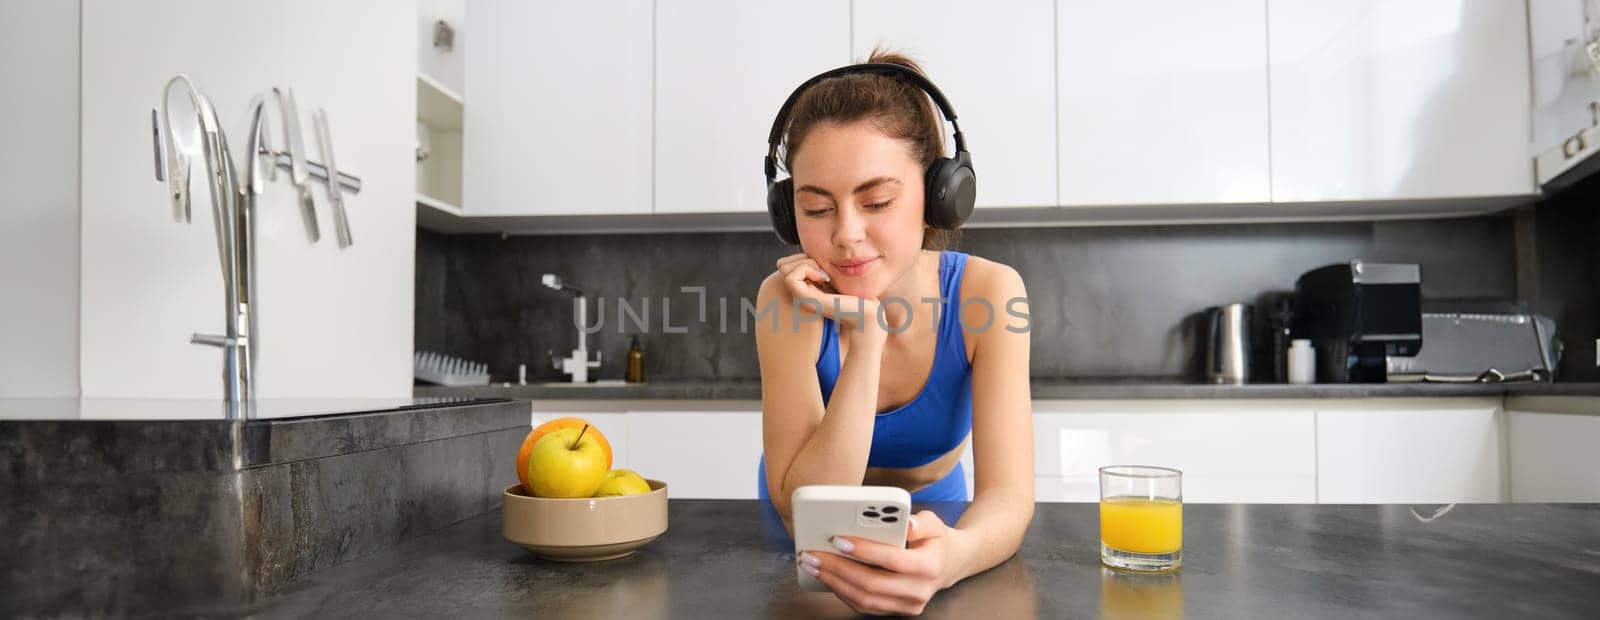 Portrait of young fitness woman with headphones, drinking orange juice in kitchen and using smartphone, listening music, getting ready for workout gym.